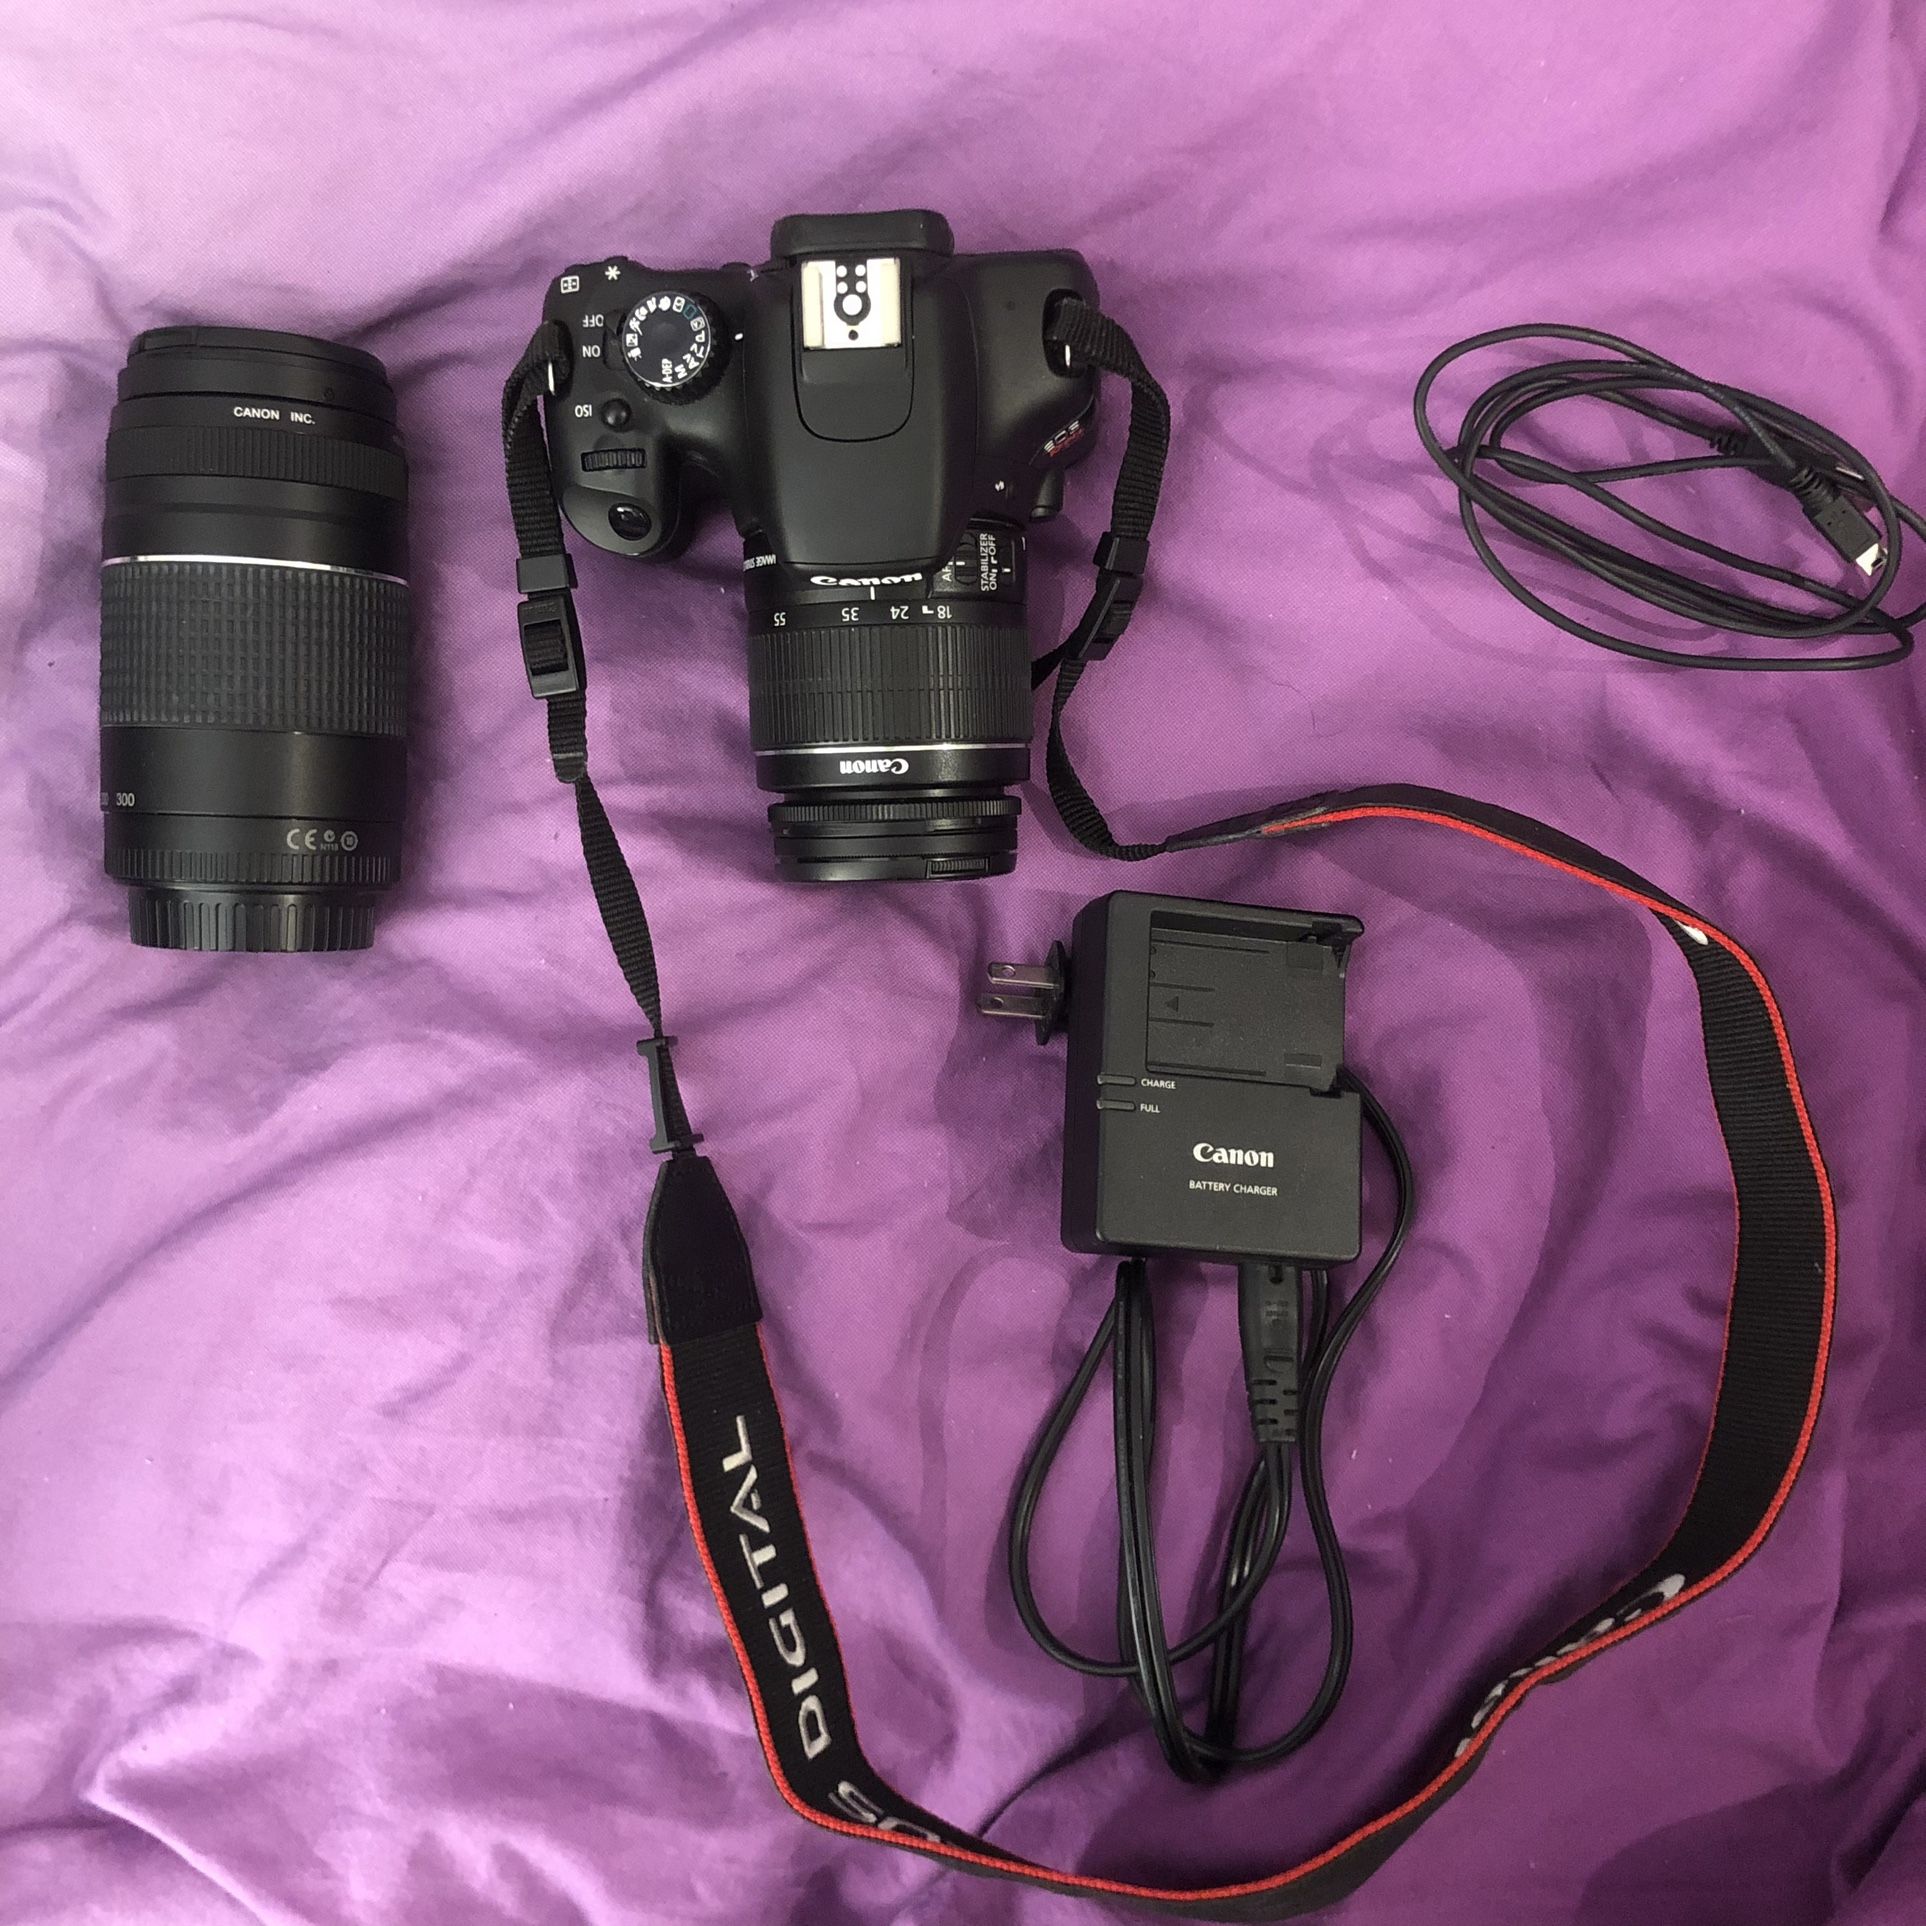 Canon Rebel T2i w/ Two Lenses and Accessories